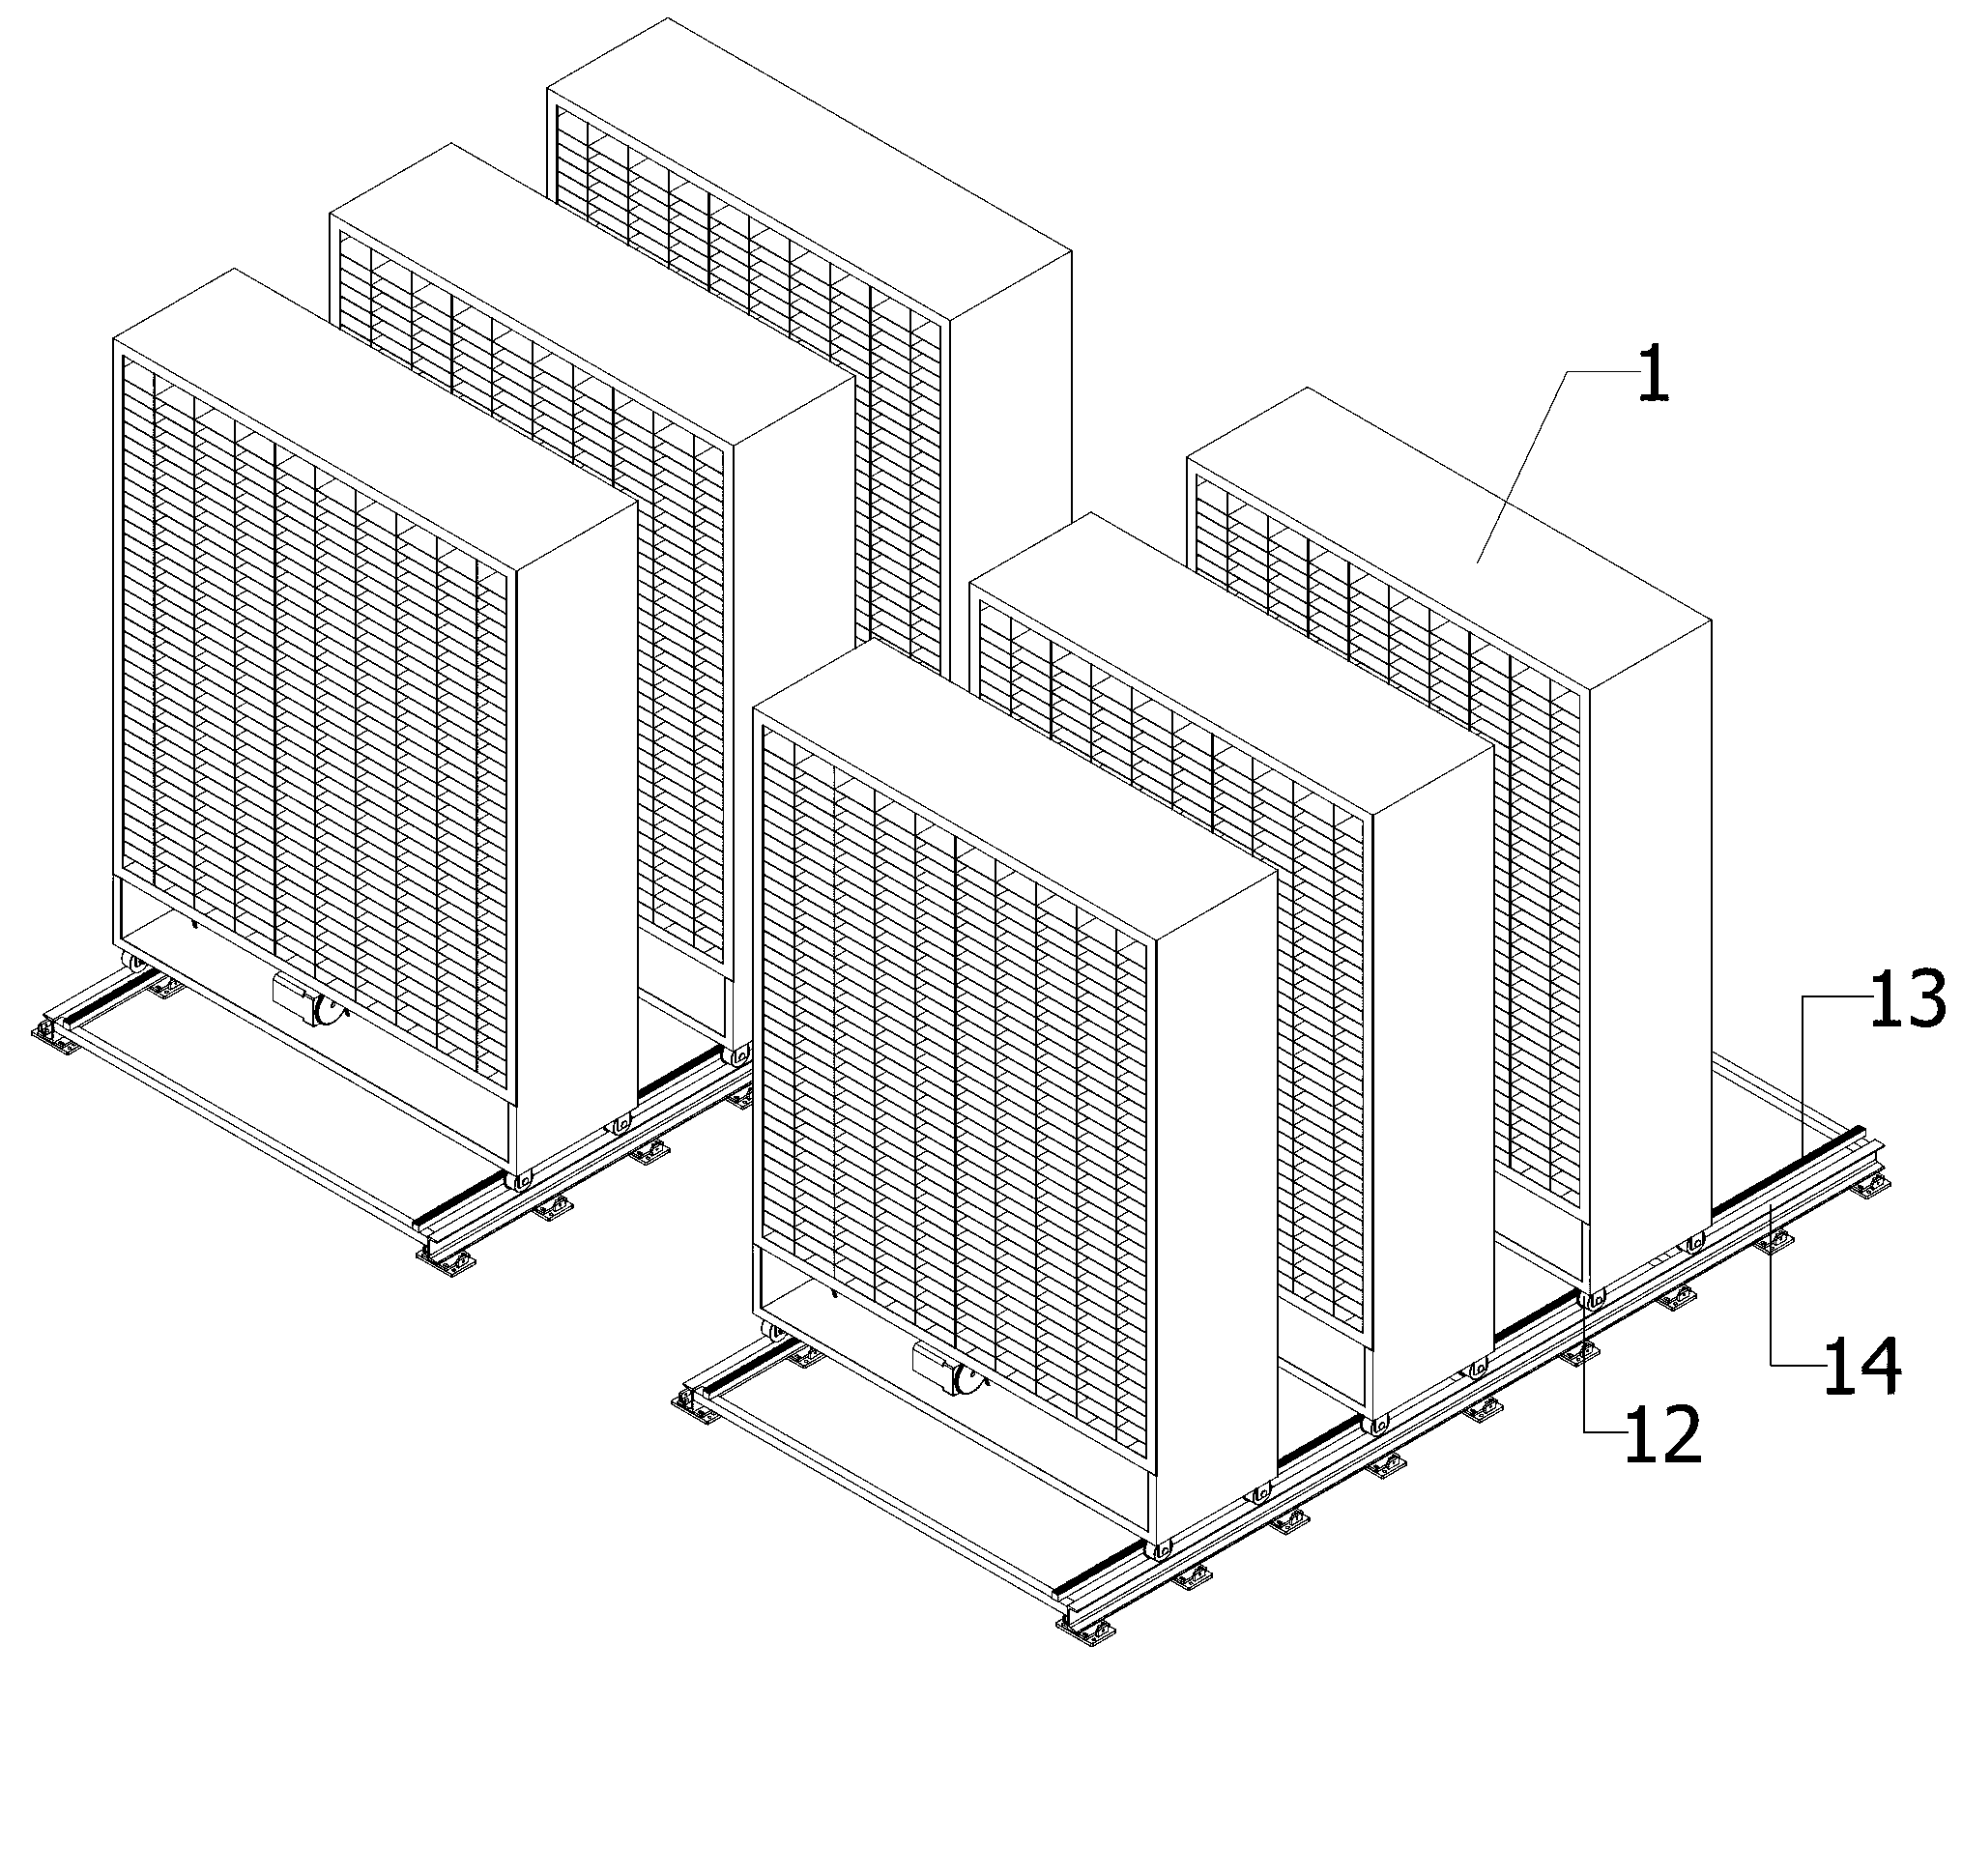 Automatic goods storage and fetching system